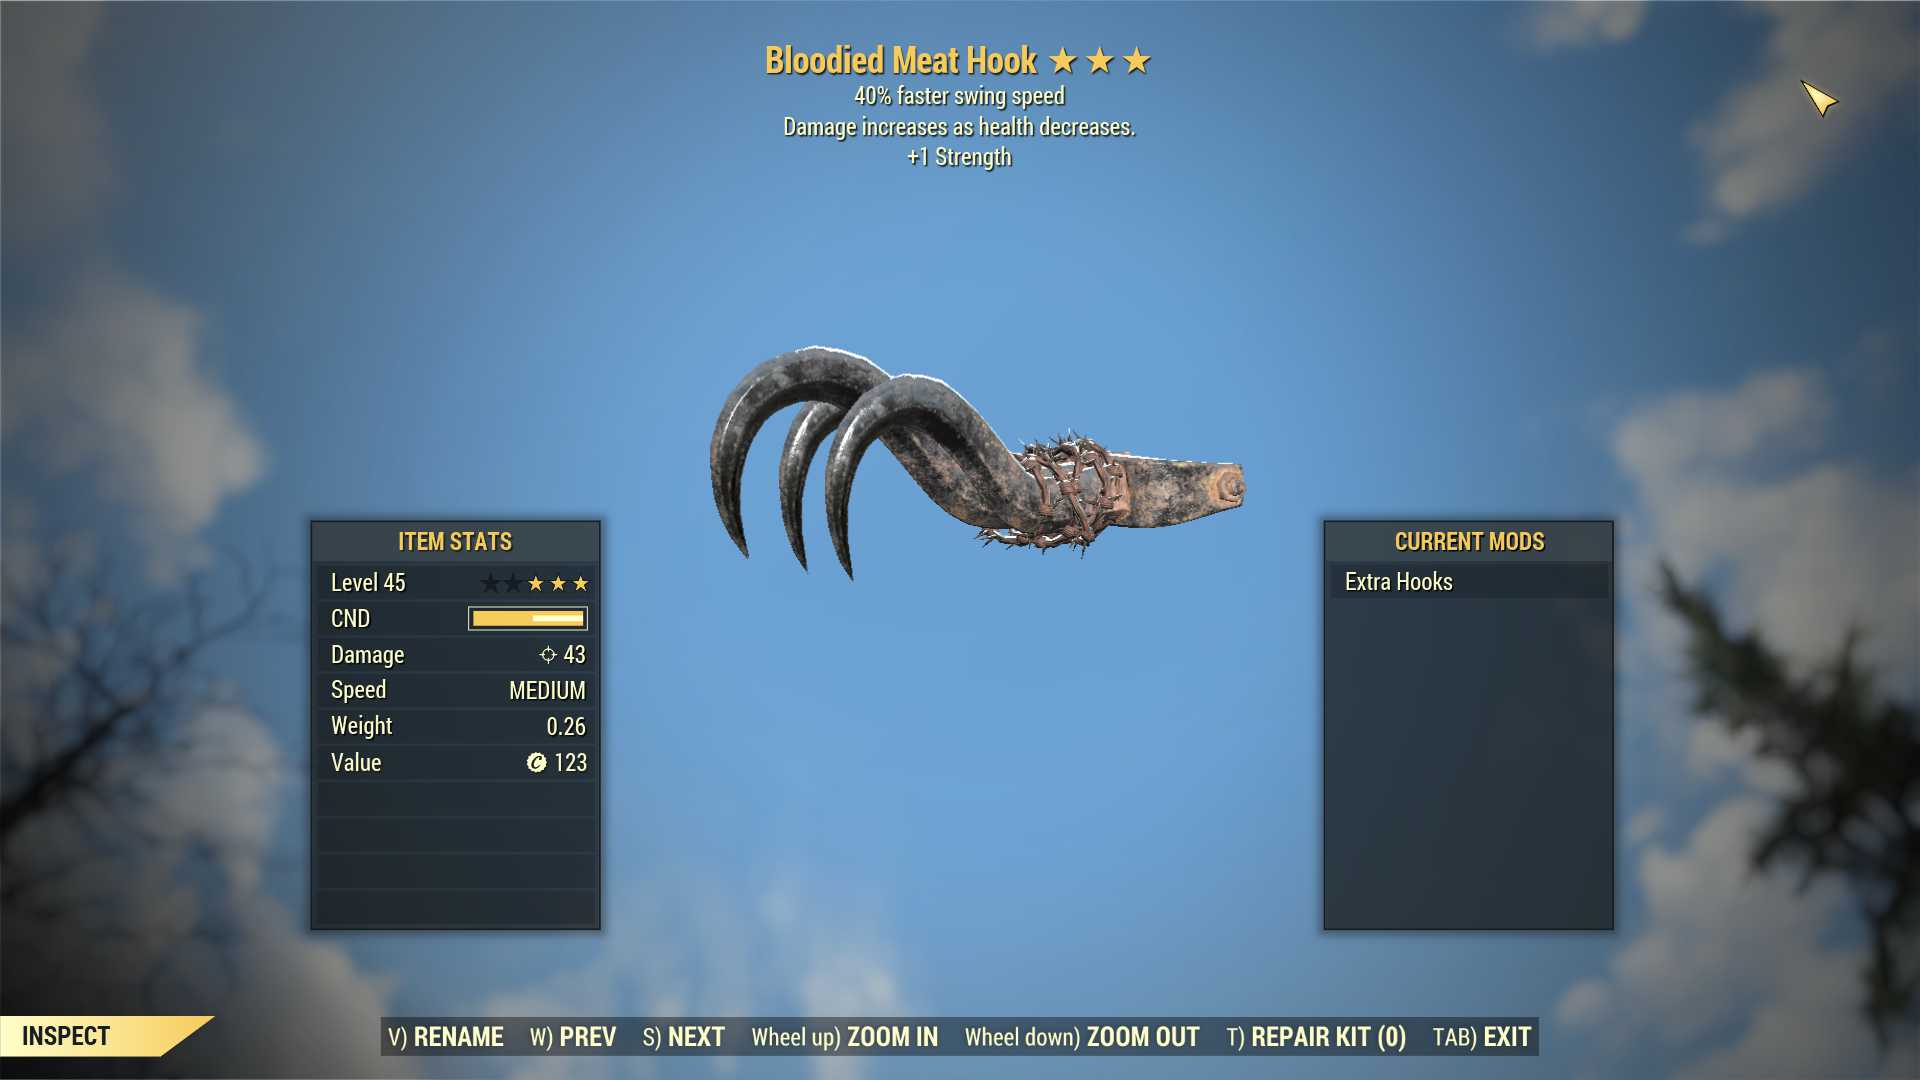 Bloodied Meat Hook (40% Faster Swing Speed, +1 Strength)